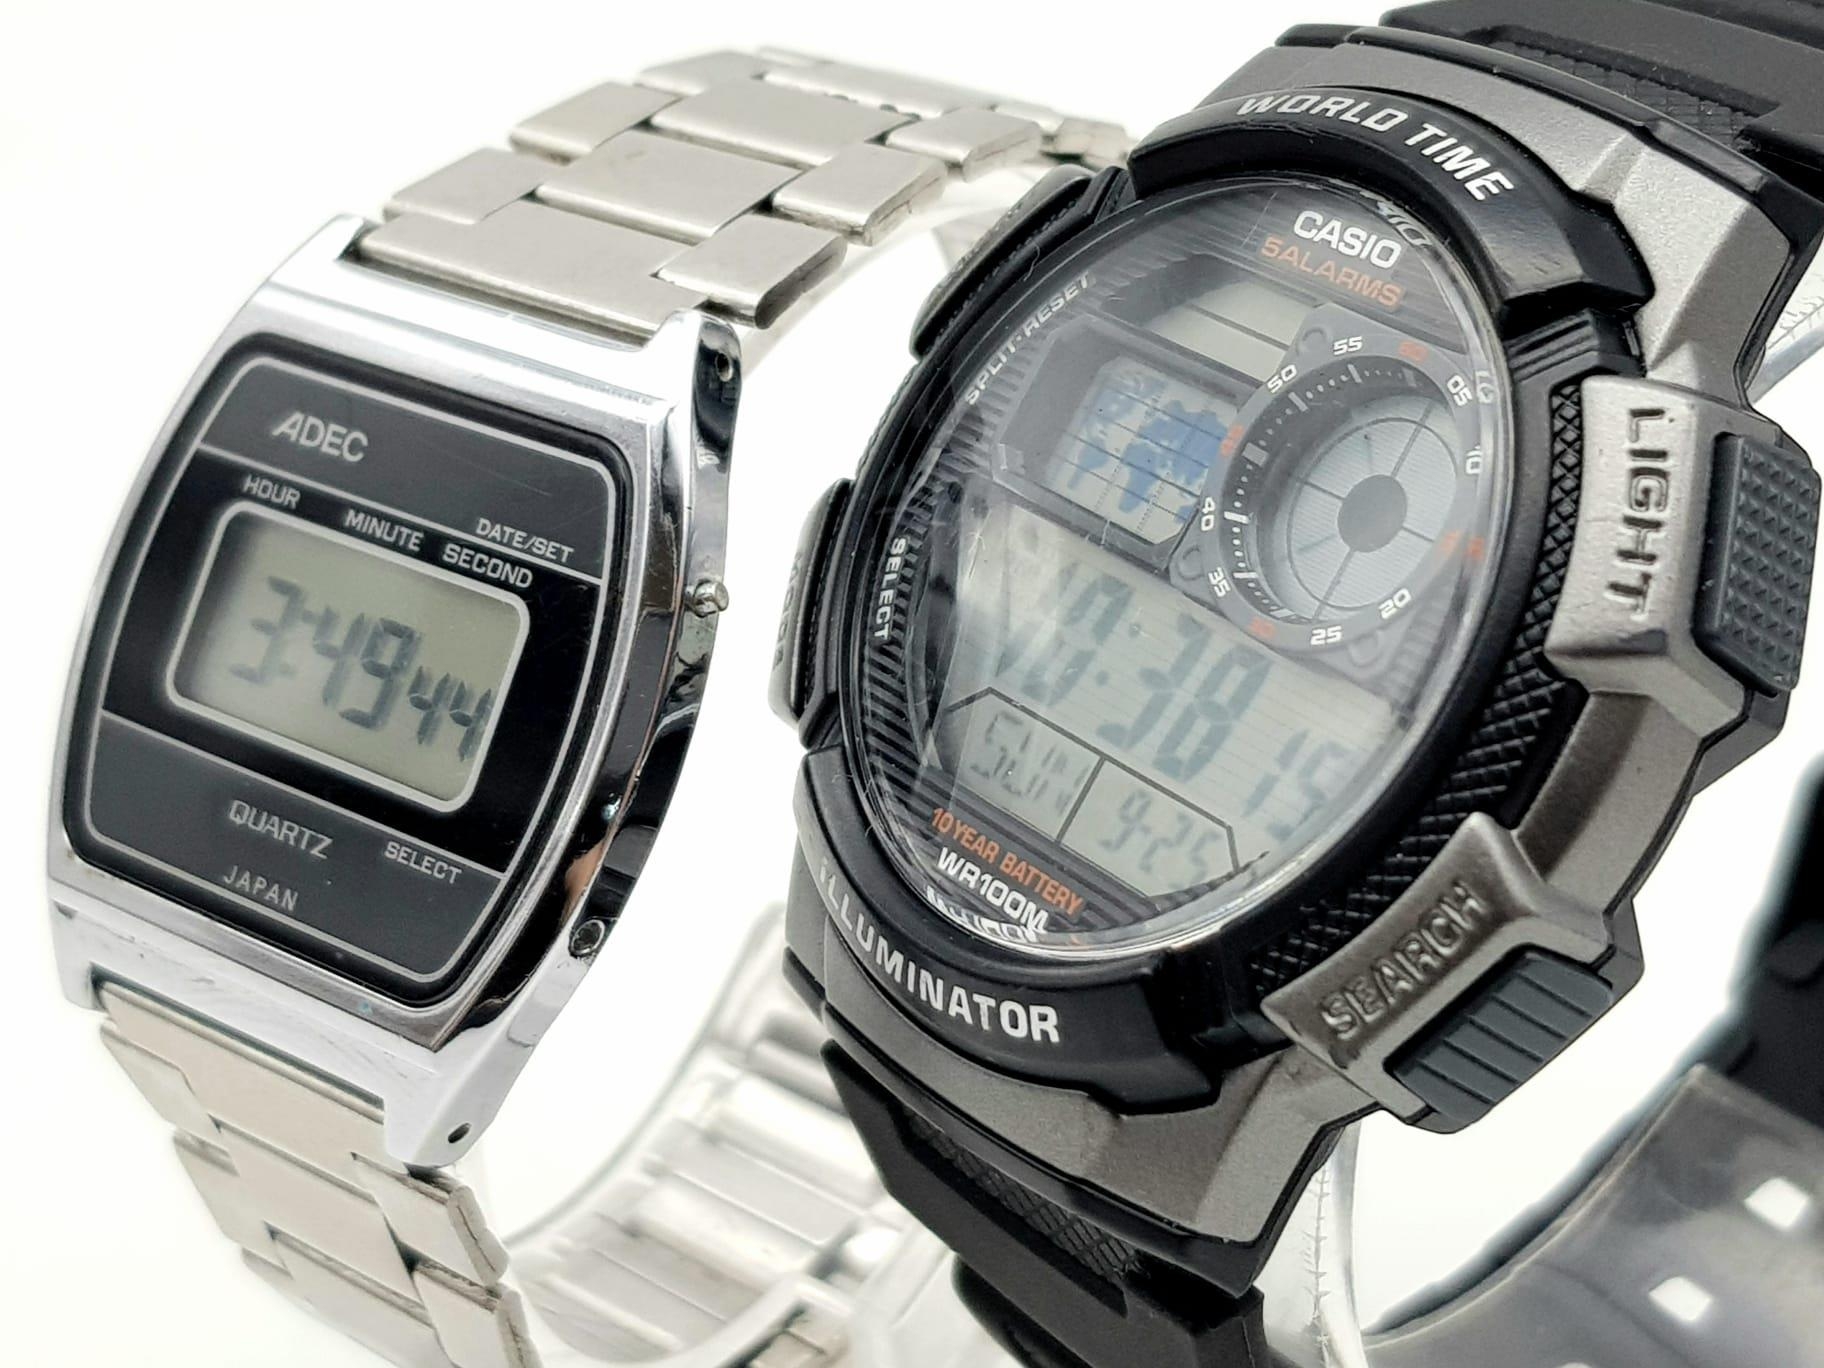 Two Digital Watches. A Casio and an Adec. Both in working order. - Image 3 of 5